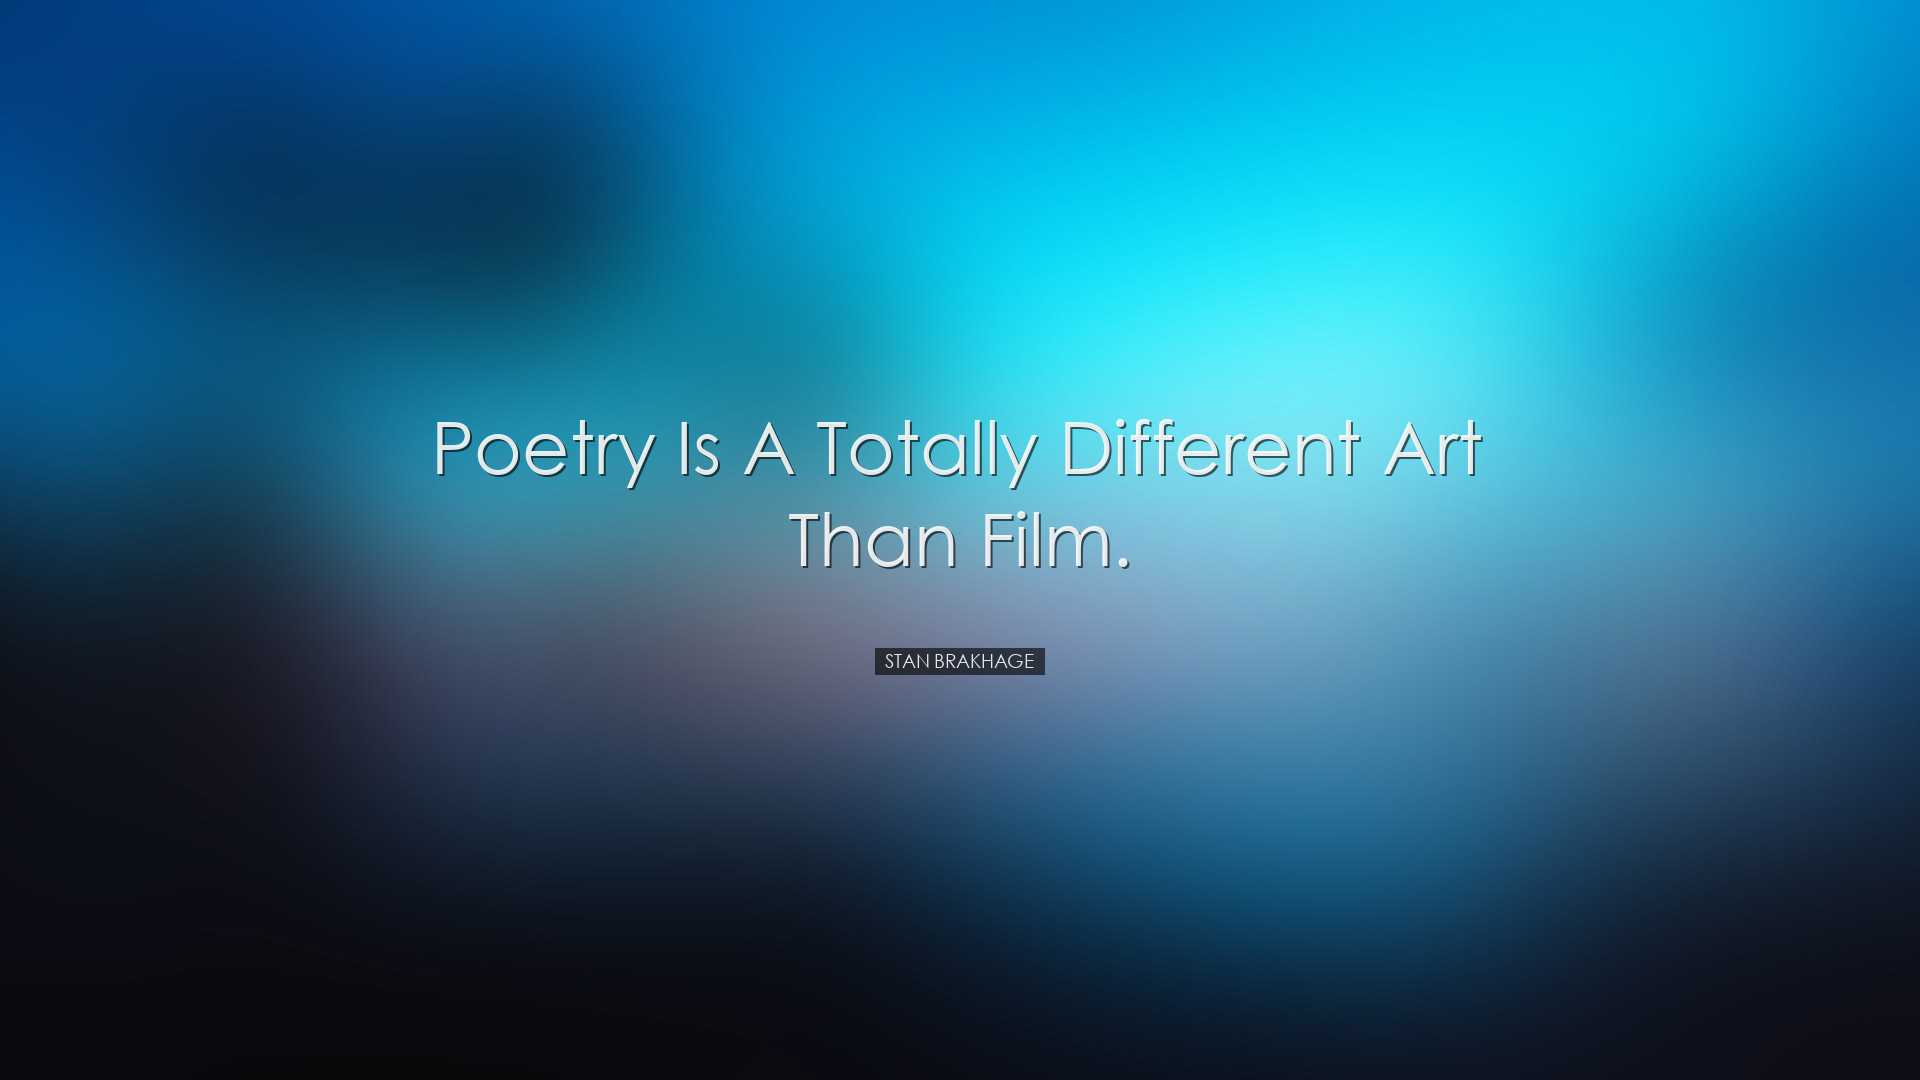 Poetry is a totally different art than film. - Stan Brakhage